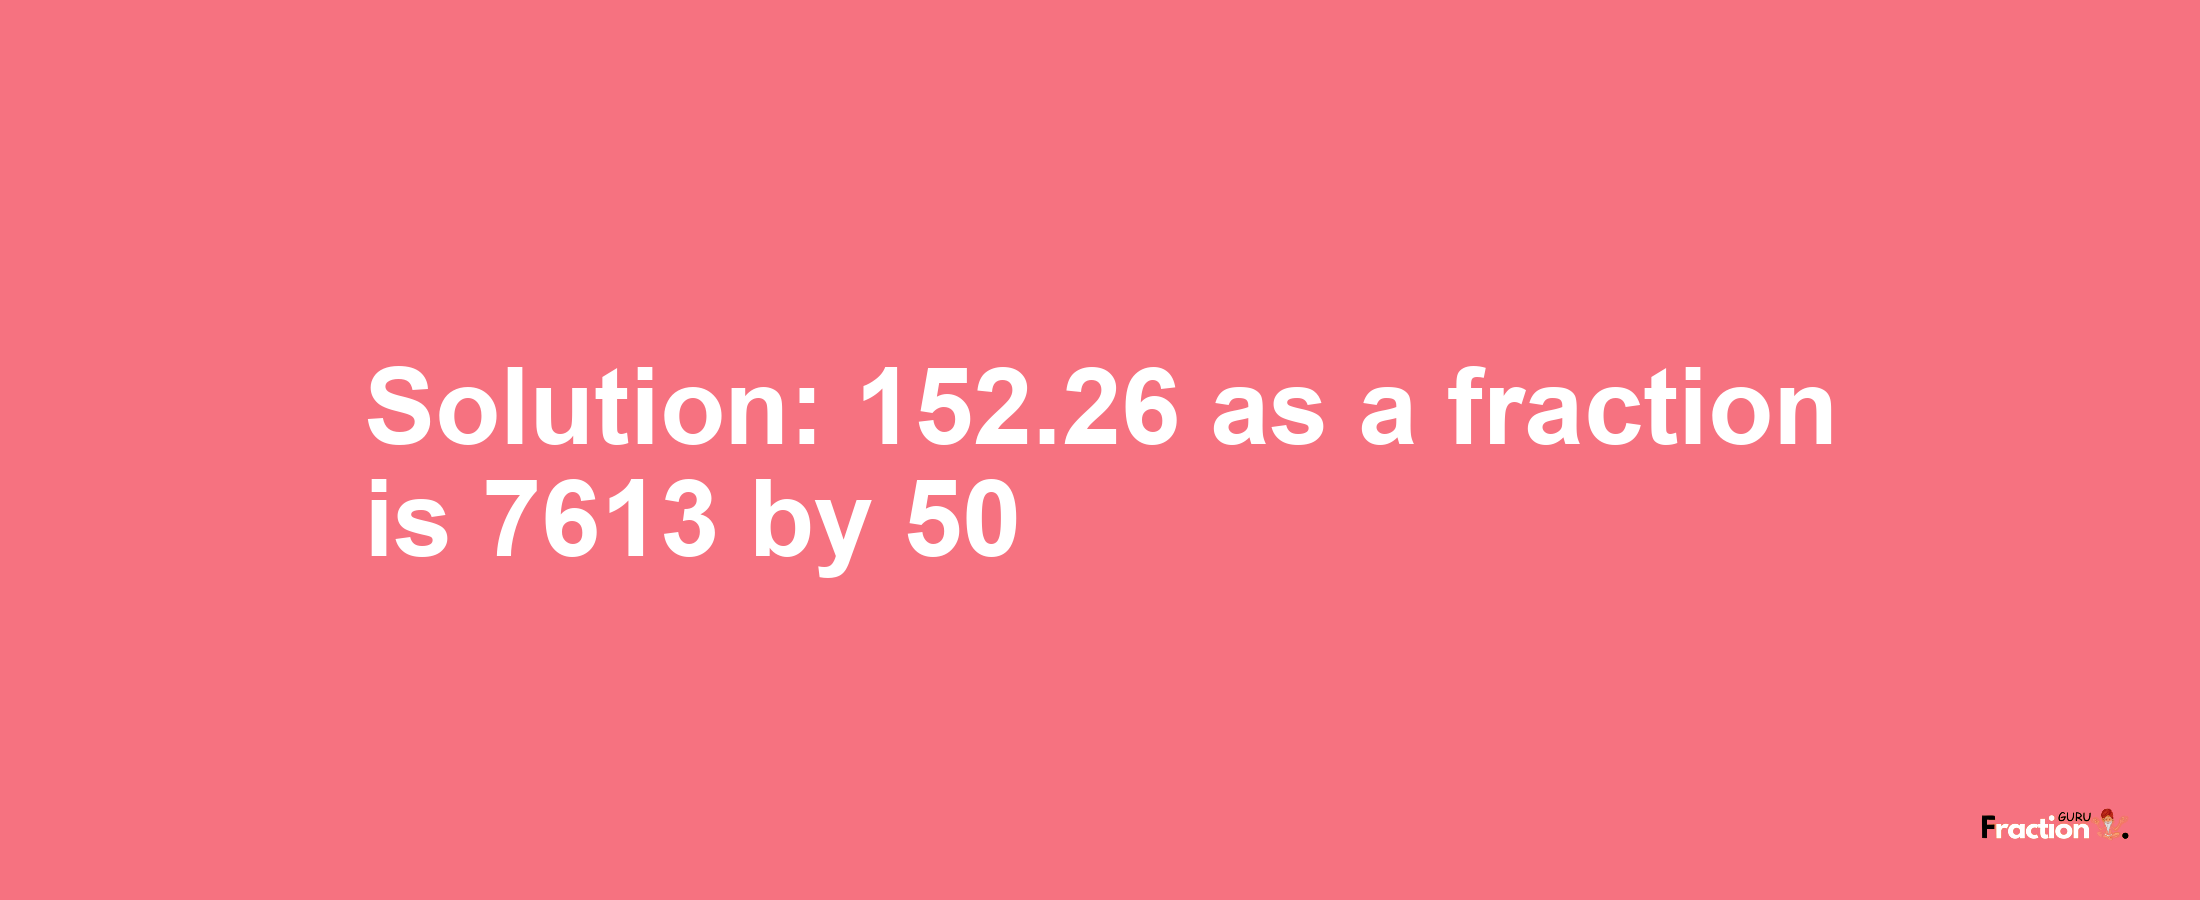 Solution:152.26 as a fraction is 7613/50